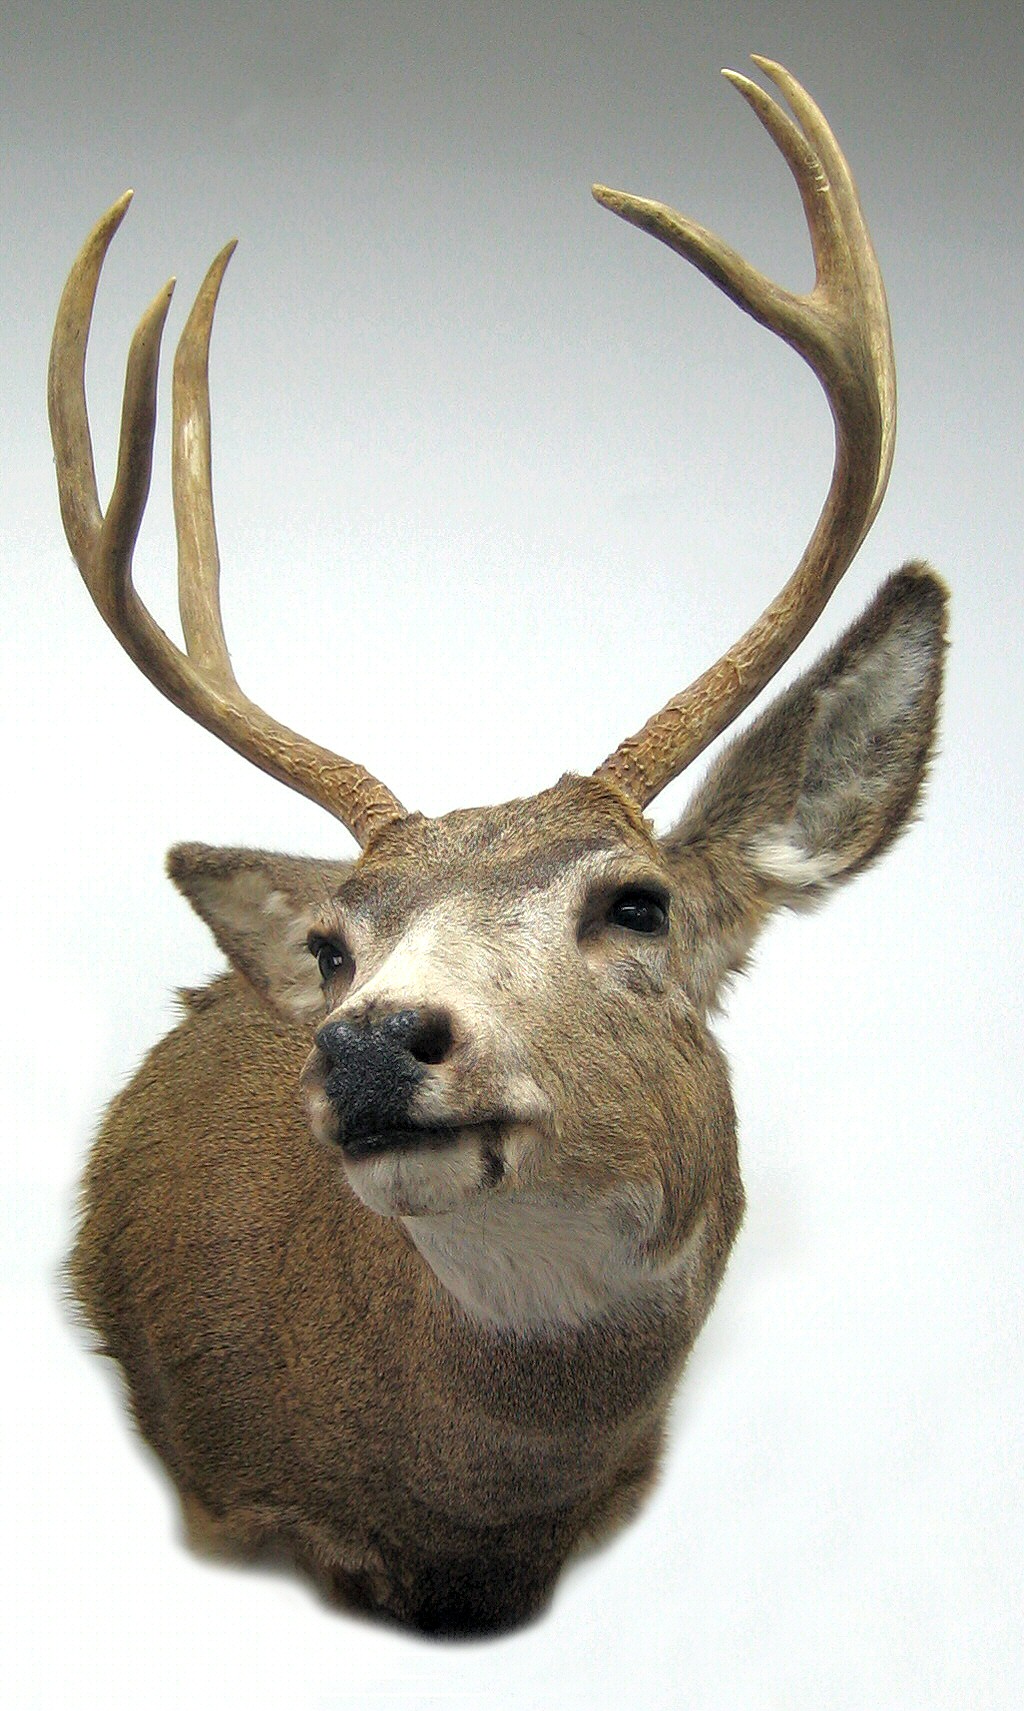 Mule Deer hunters that travel everywhere send us their mule deer to mount because of our attention to detail and our reputation for Quality! Mule Deer Mounts - Mule Deer Shoulder Mounts - Mule Deer Pedestal Mounts - Mule Deer Mount Poses Full Sneak Semi Sneak -  Mule Deer Mount Ideas Positions Poses Pictures